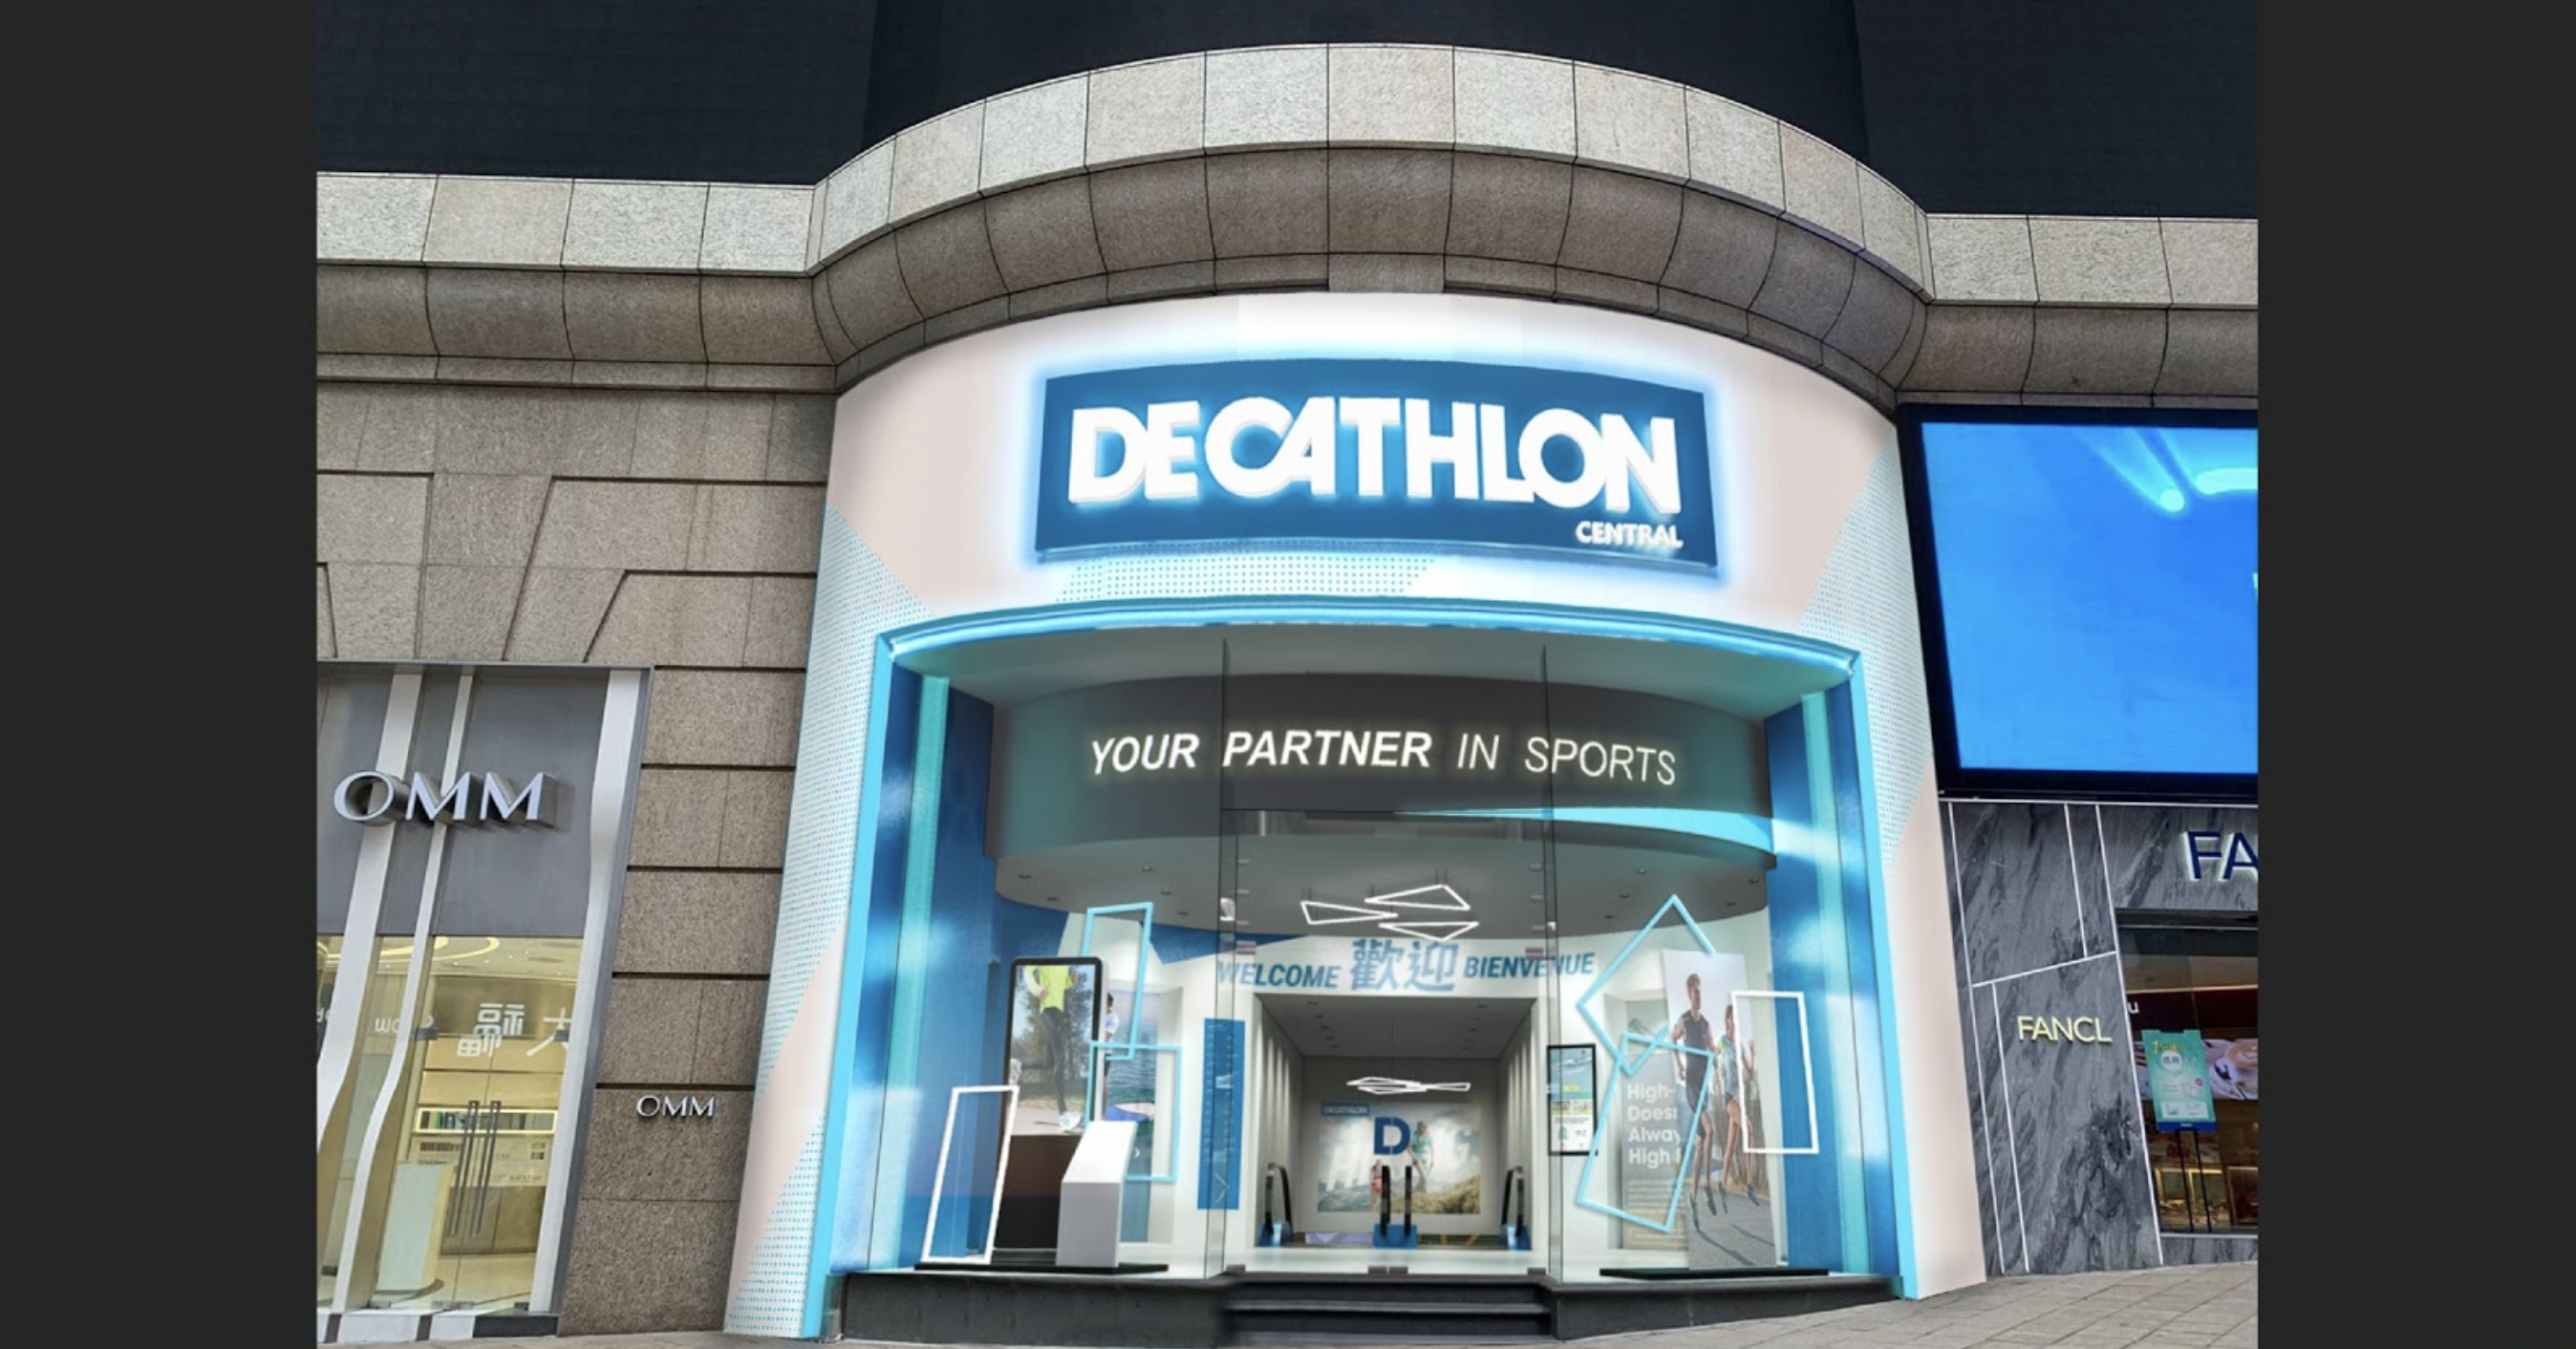 The new Decathlon store in Central, which opened in October 2020.